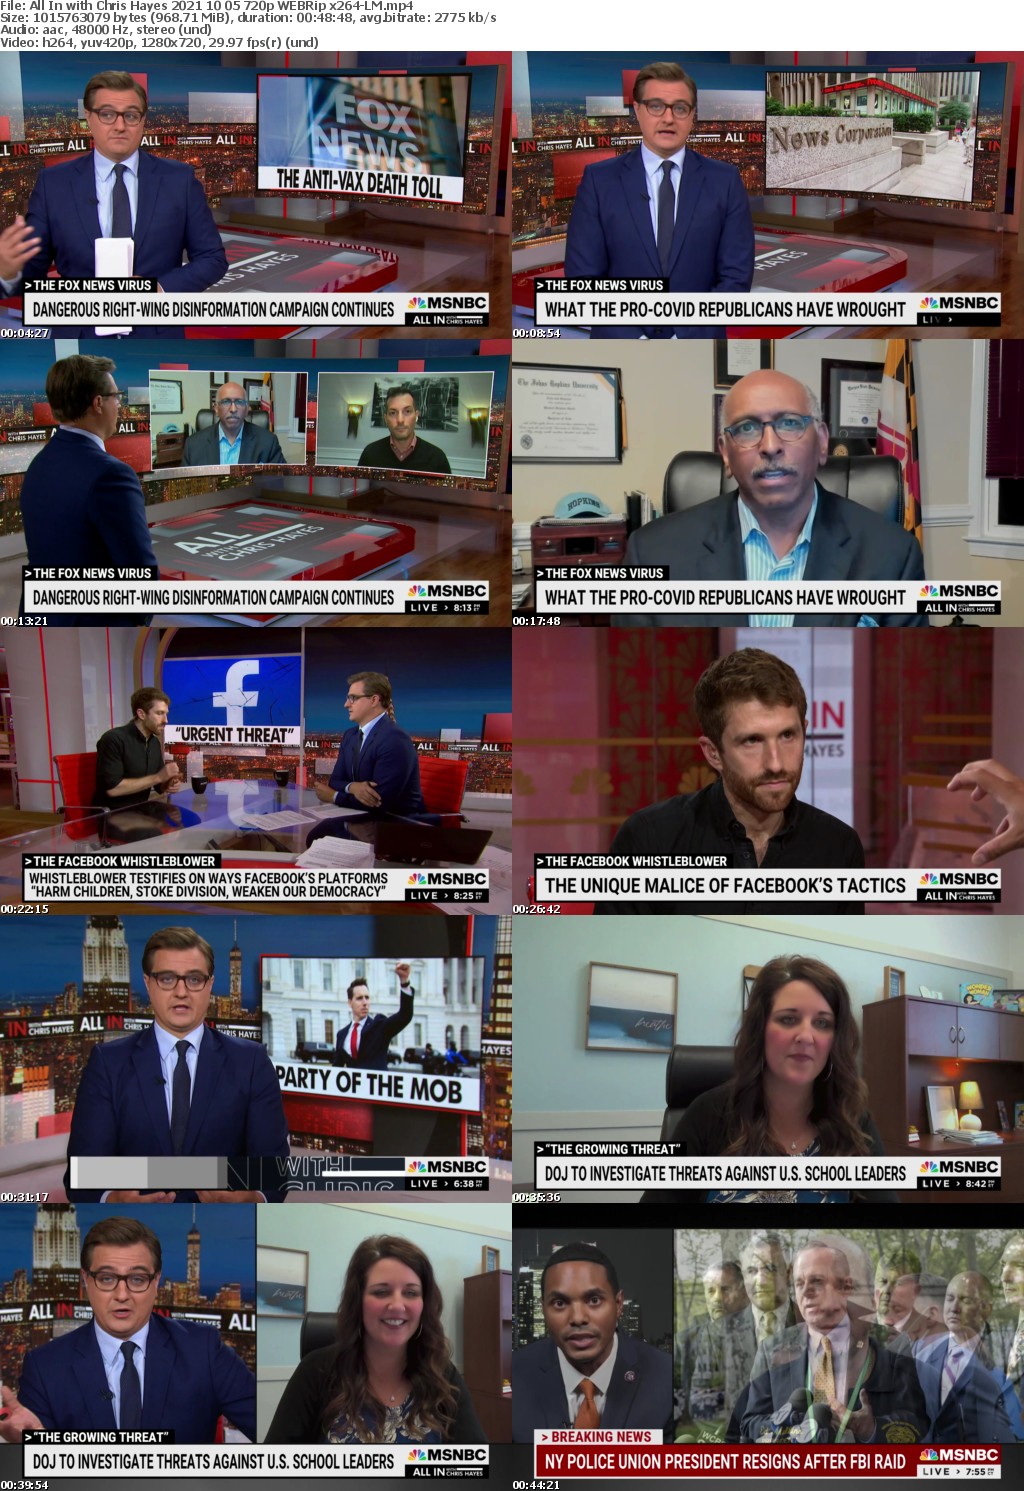 All In with Chris Hayes 2021 10 05 720p WEBRip x264-LM